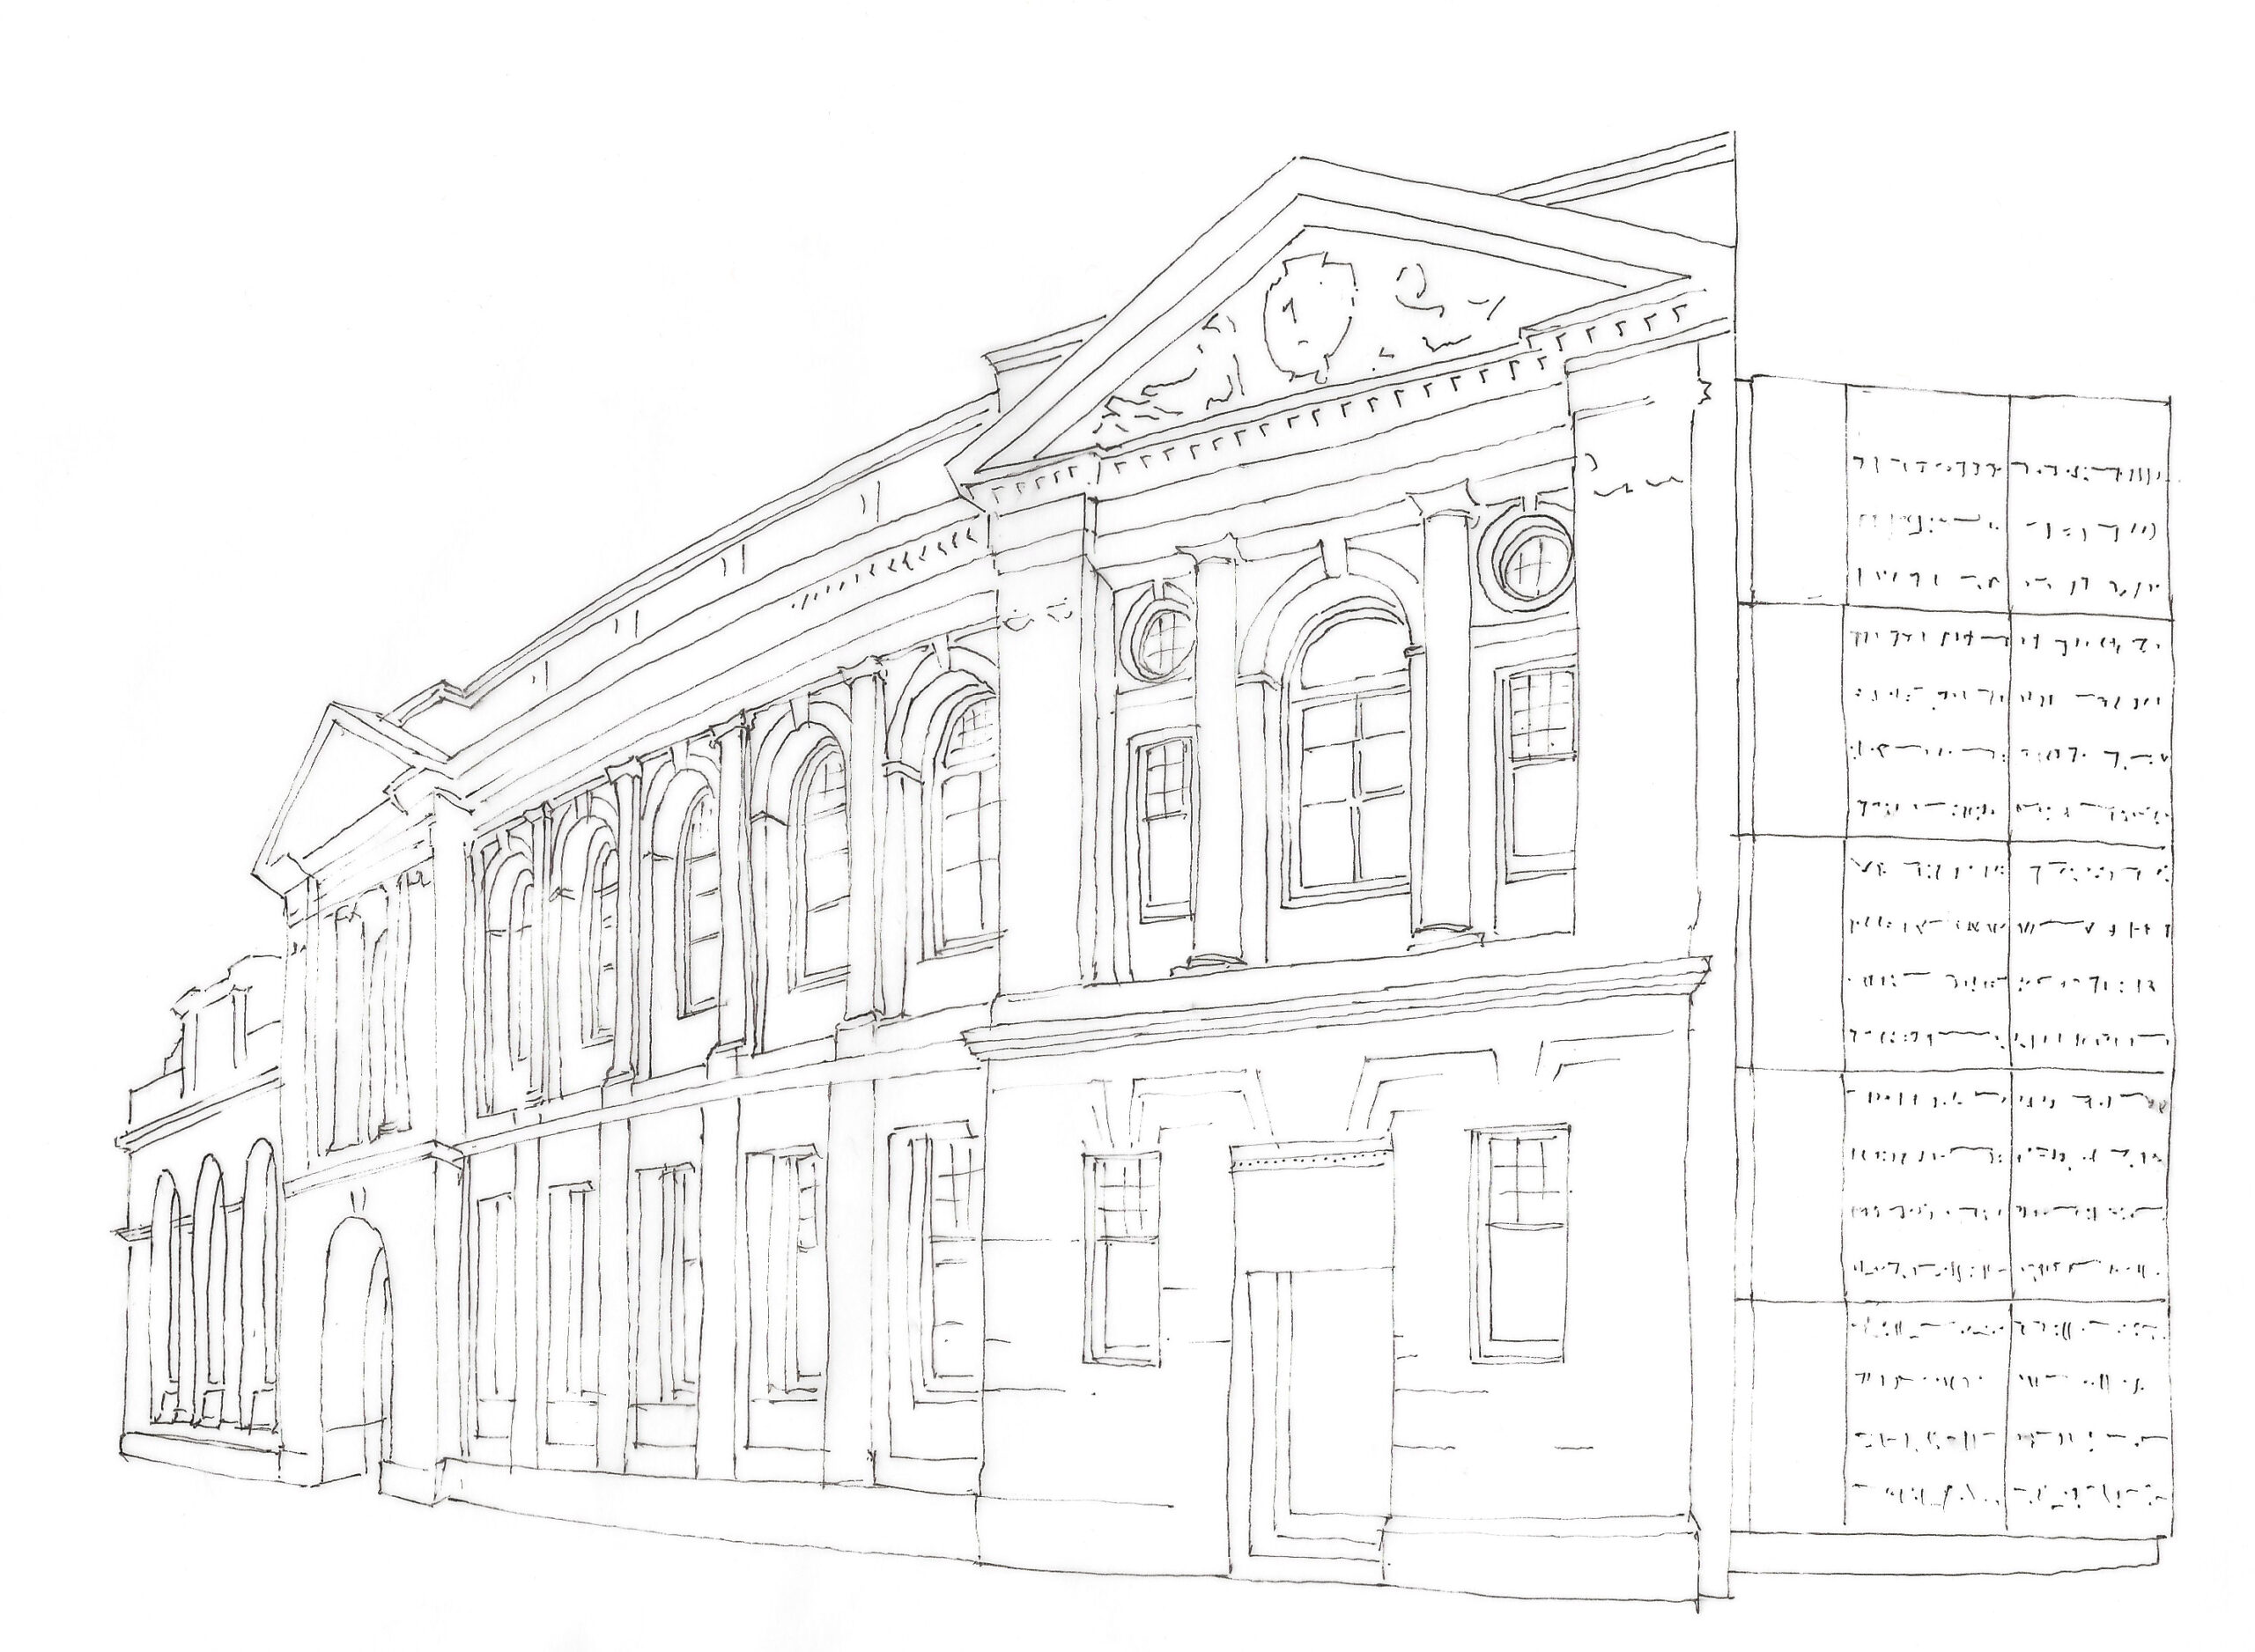 Line drawing of the GWL building, there is no shading but all the details of the facade are picked out and drawn in delicately.